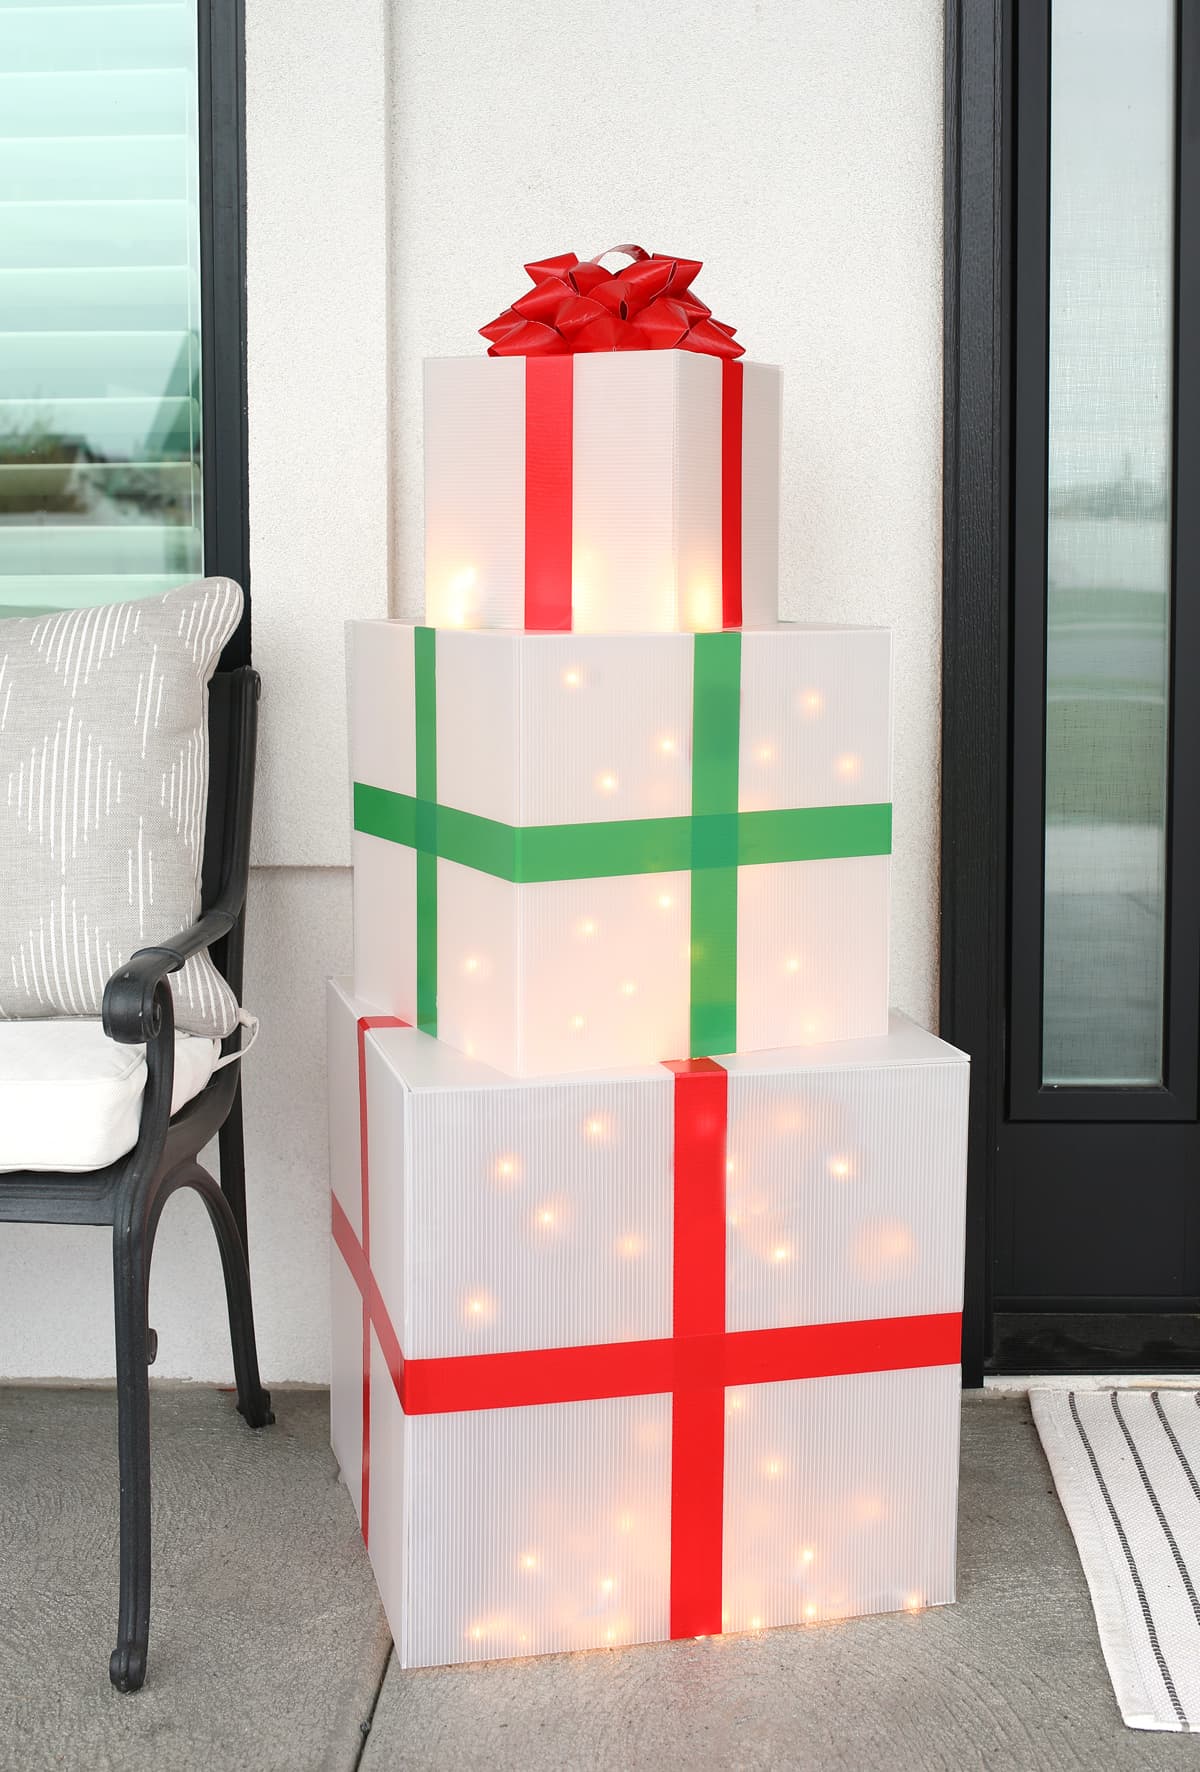 Giant Light Up Christmas Presents DIY Outdoor Decoration